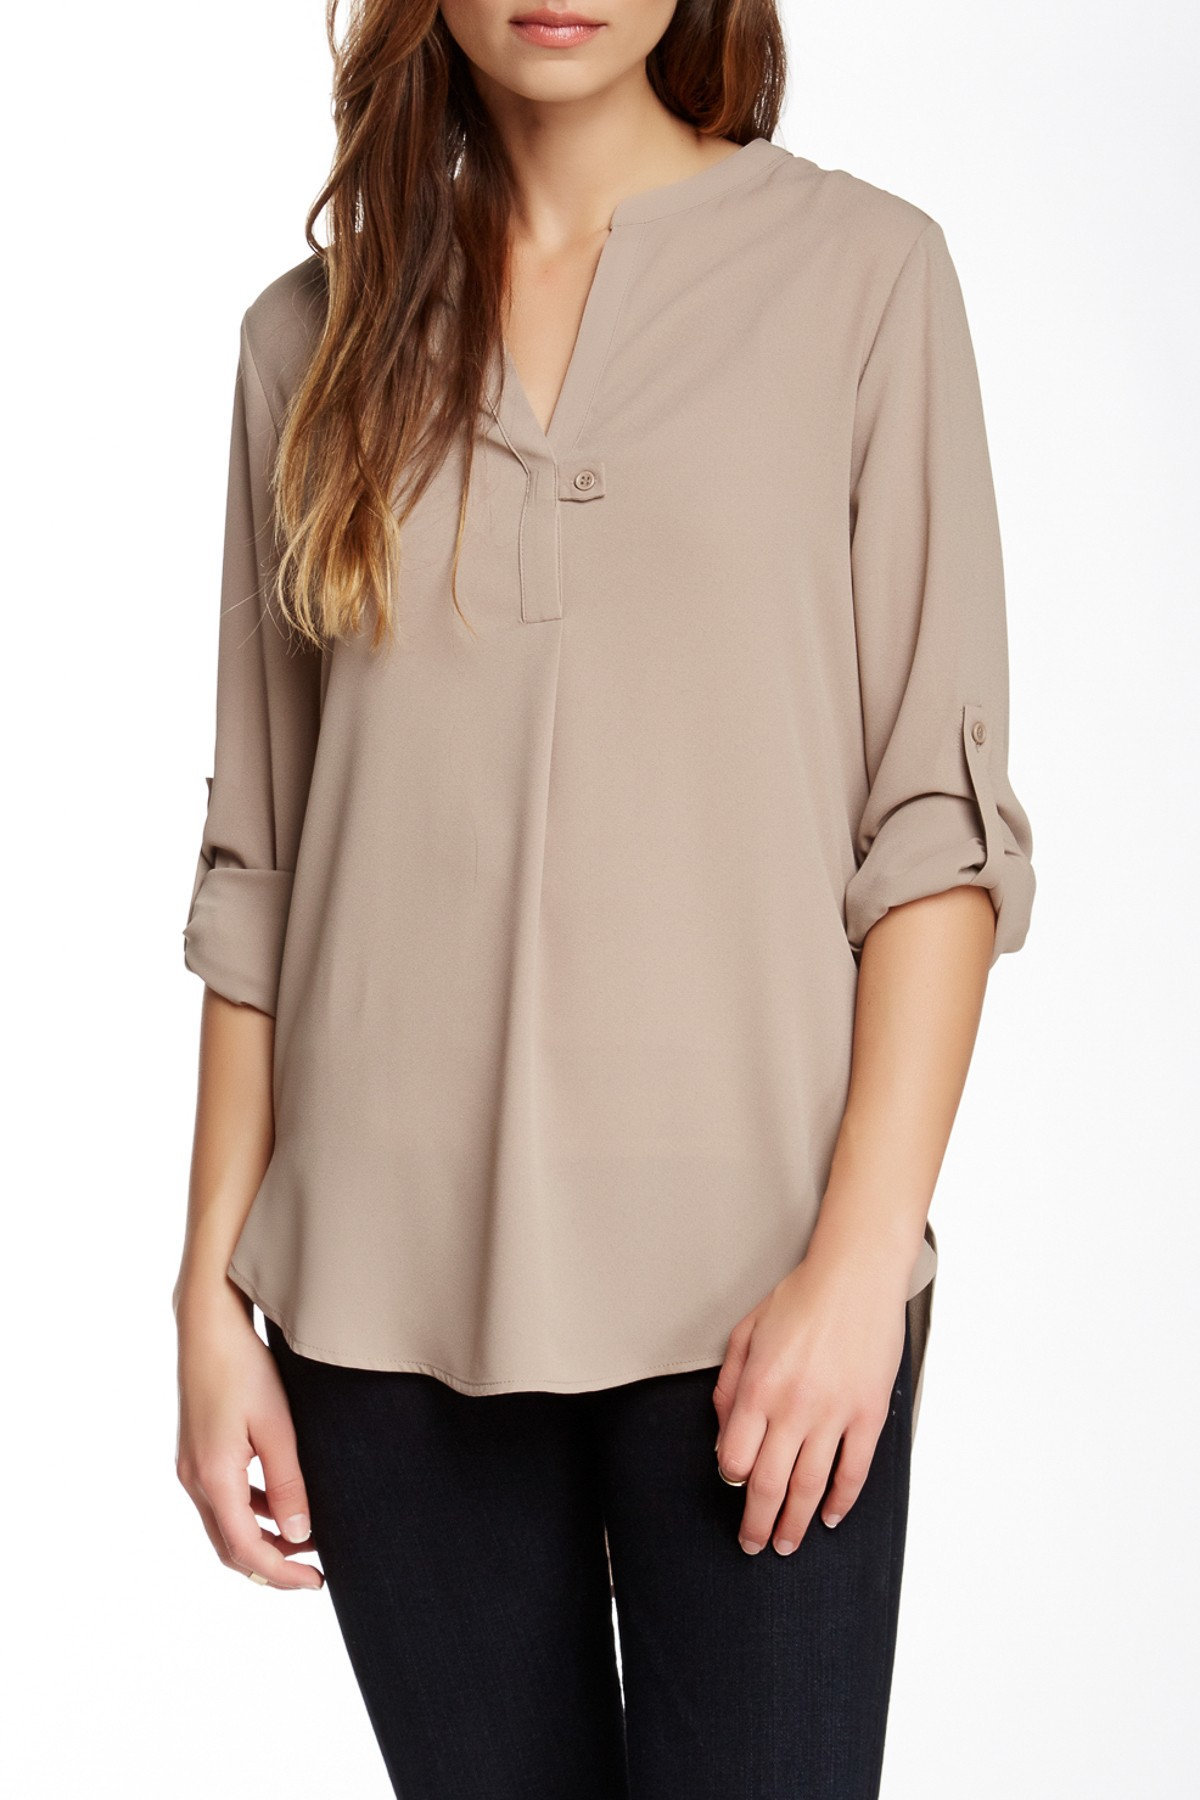 Pleione Long Sleeve Blouse in Natural | Lyst